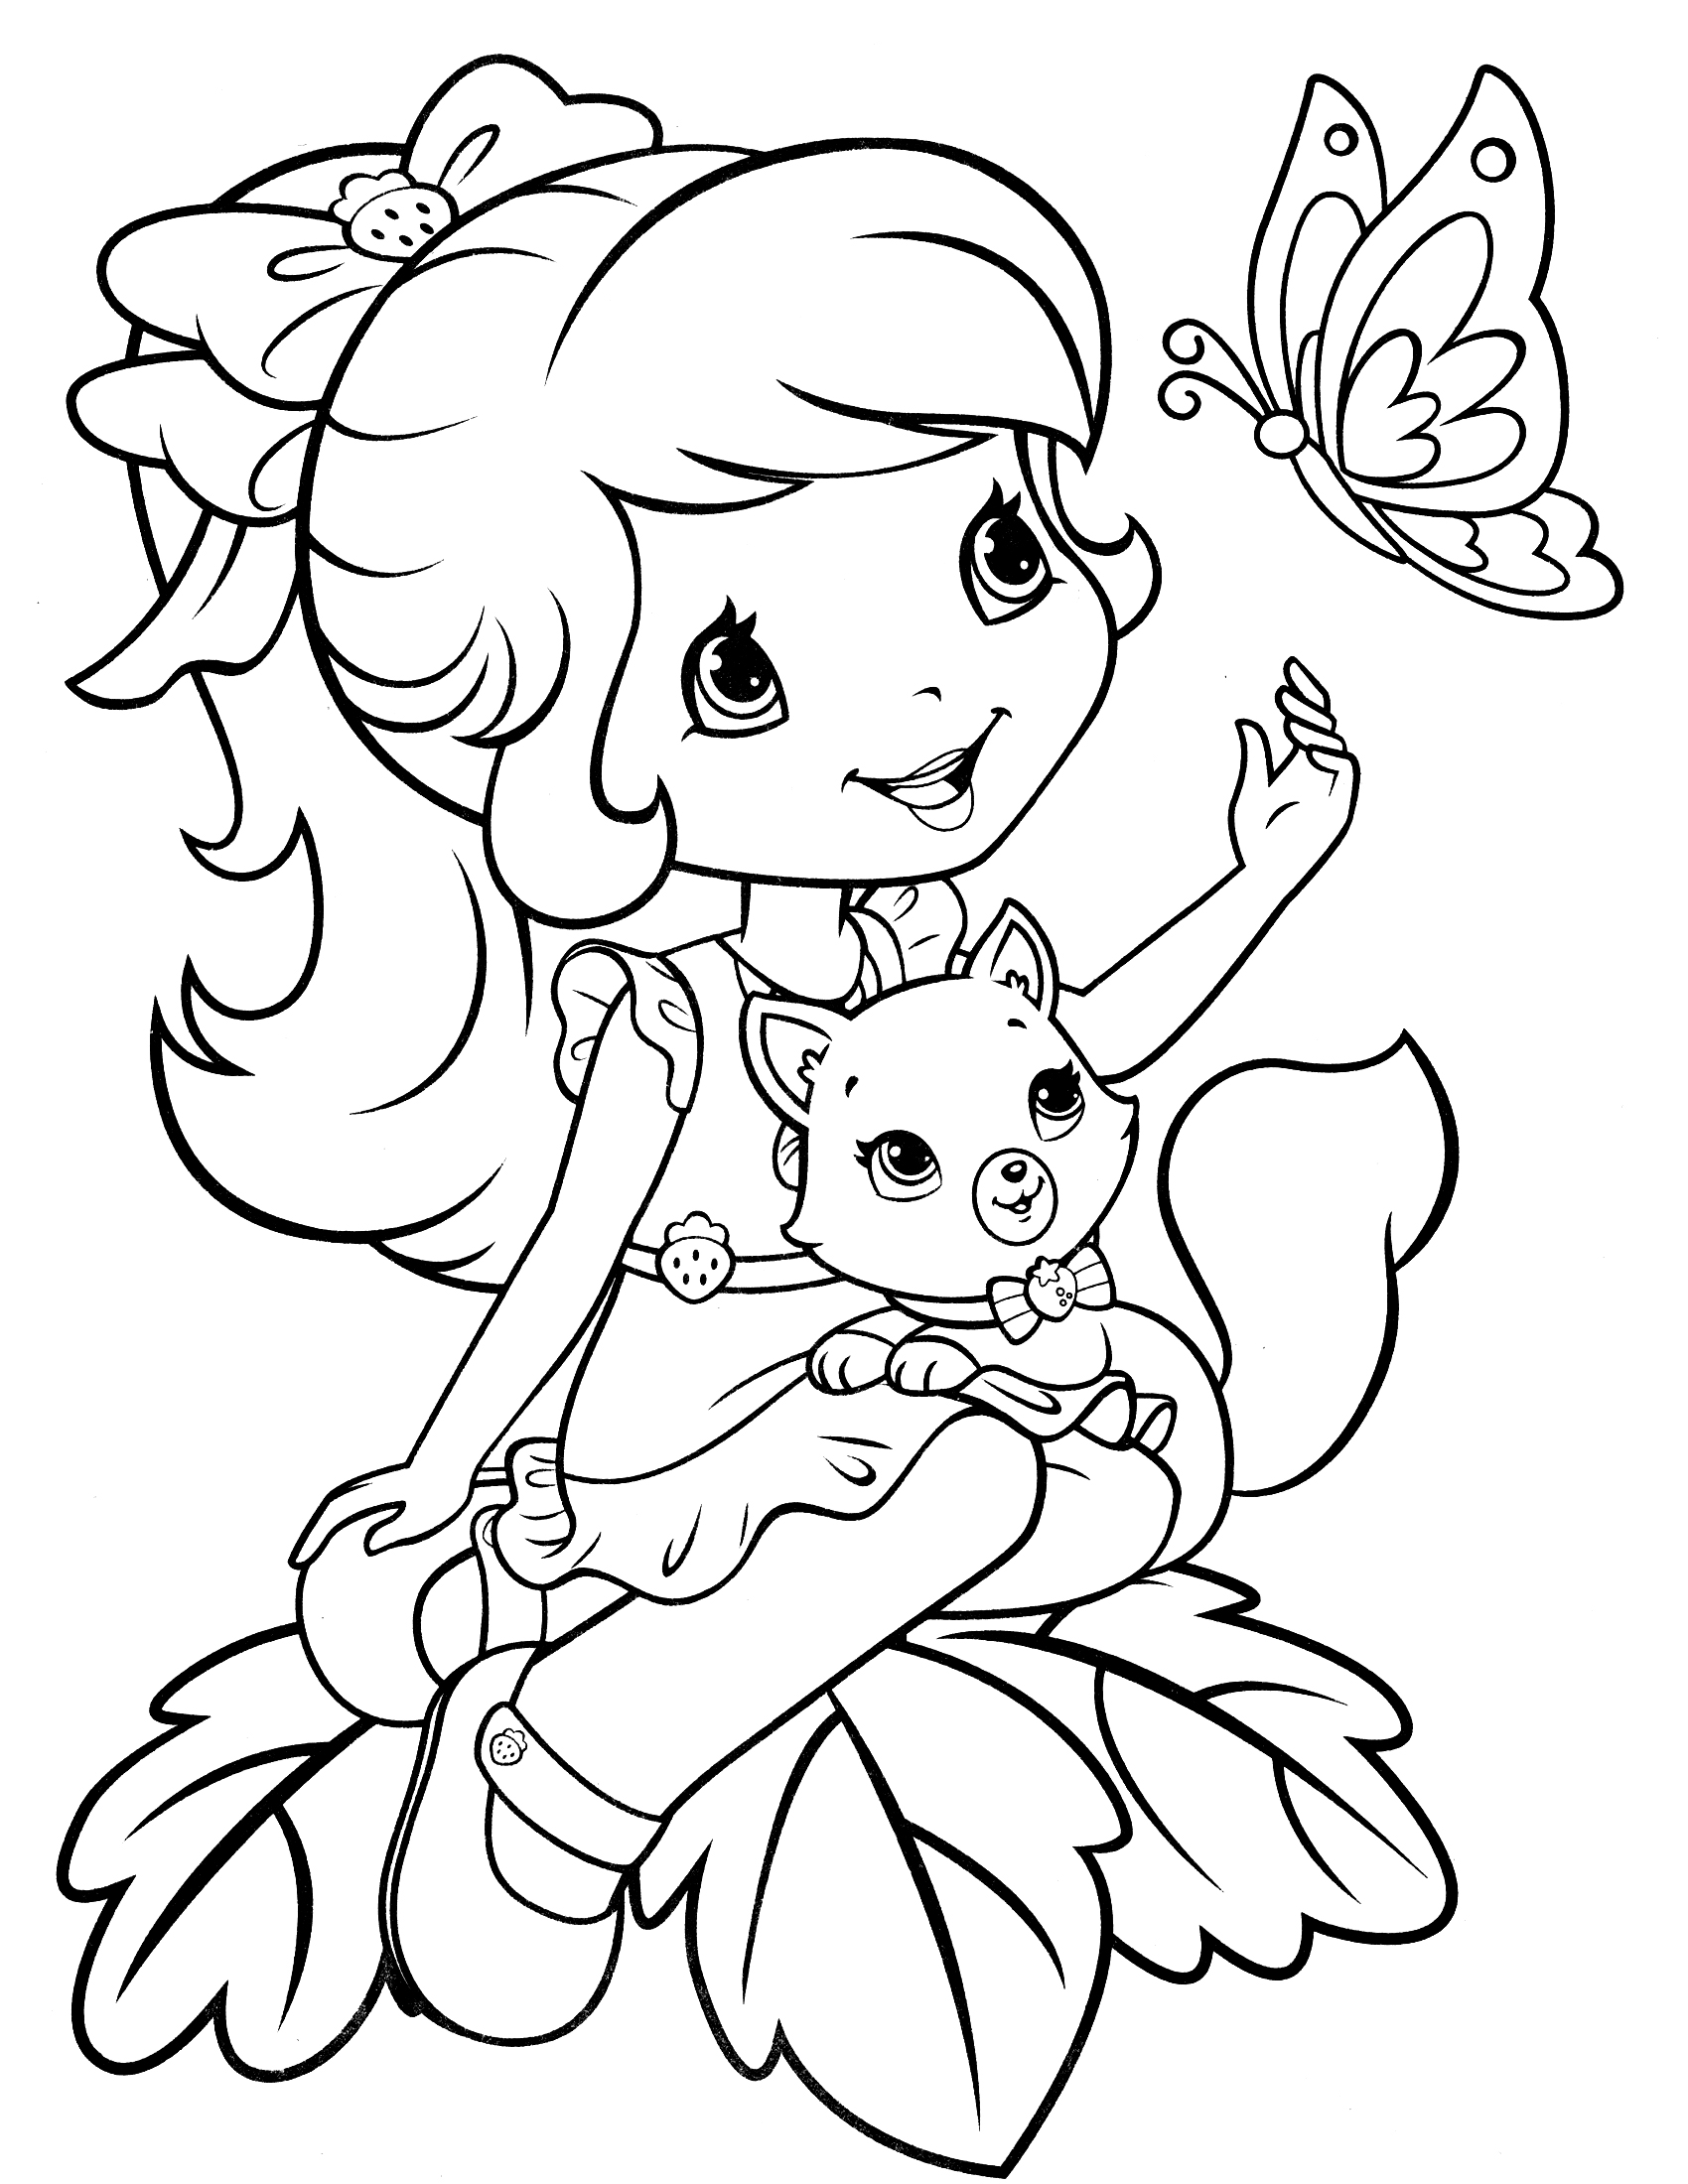  Strawberry Shortcake Coloring Pages / Cool coloring pages / 18